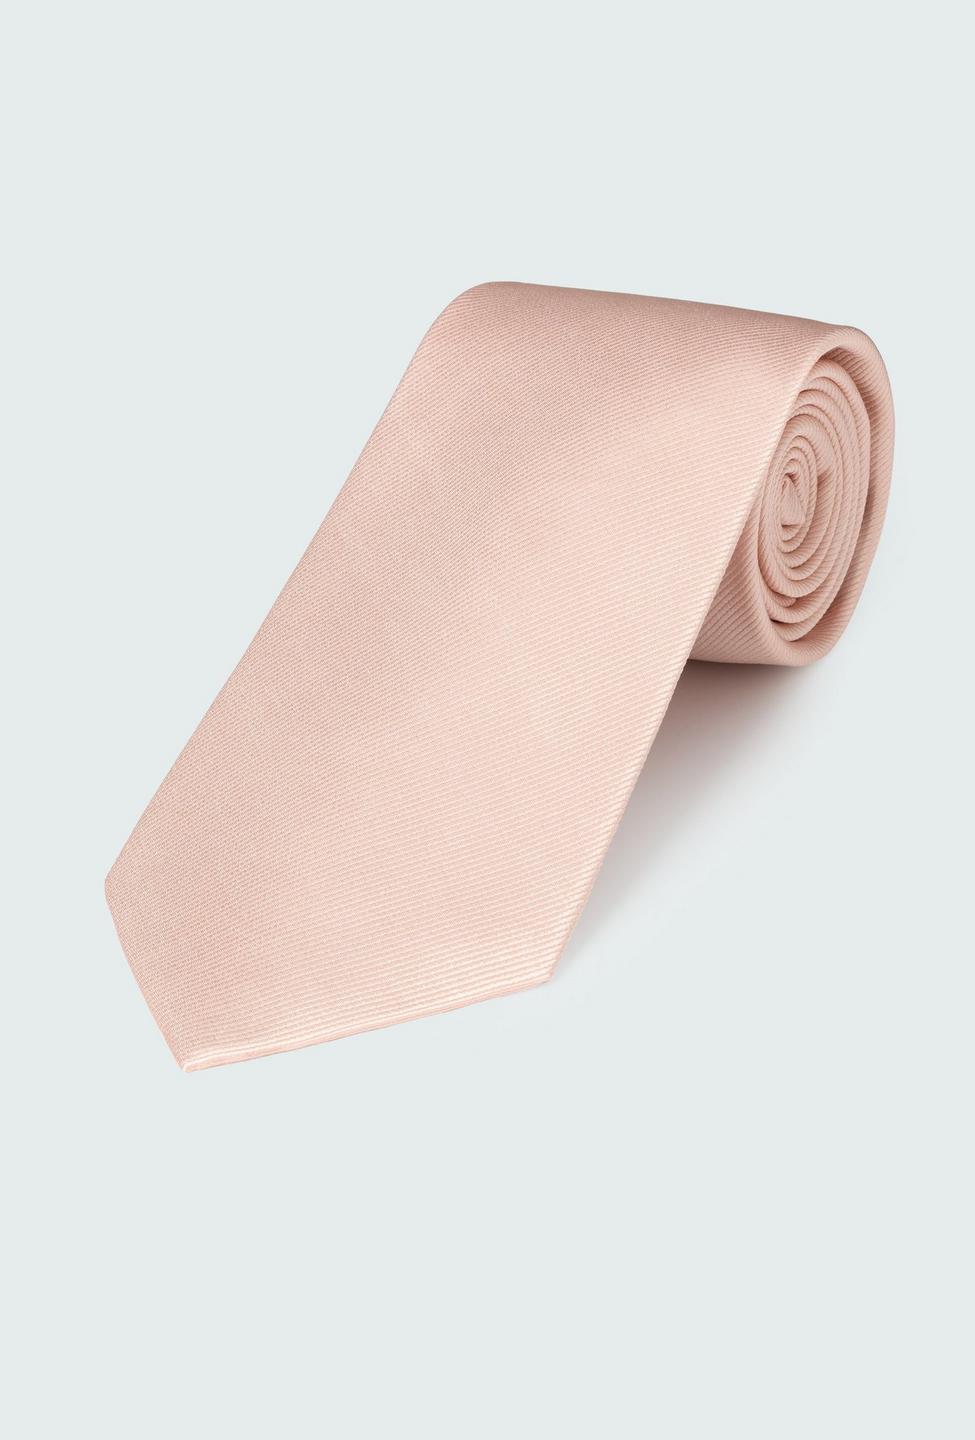 Pink tie - Solid Design from Indochino Collection